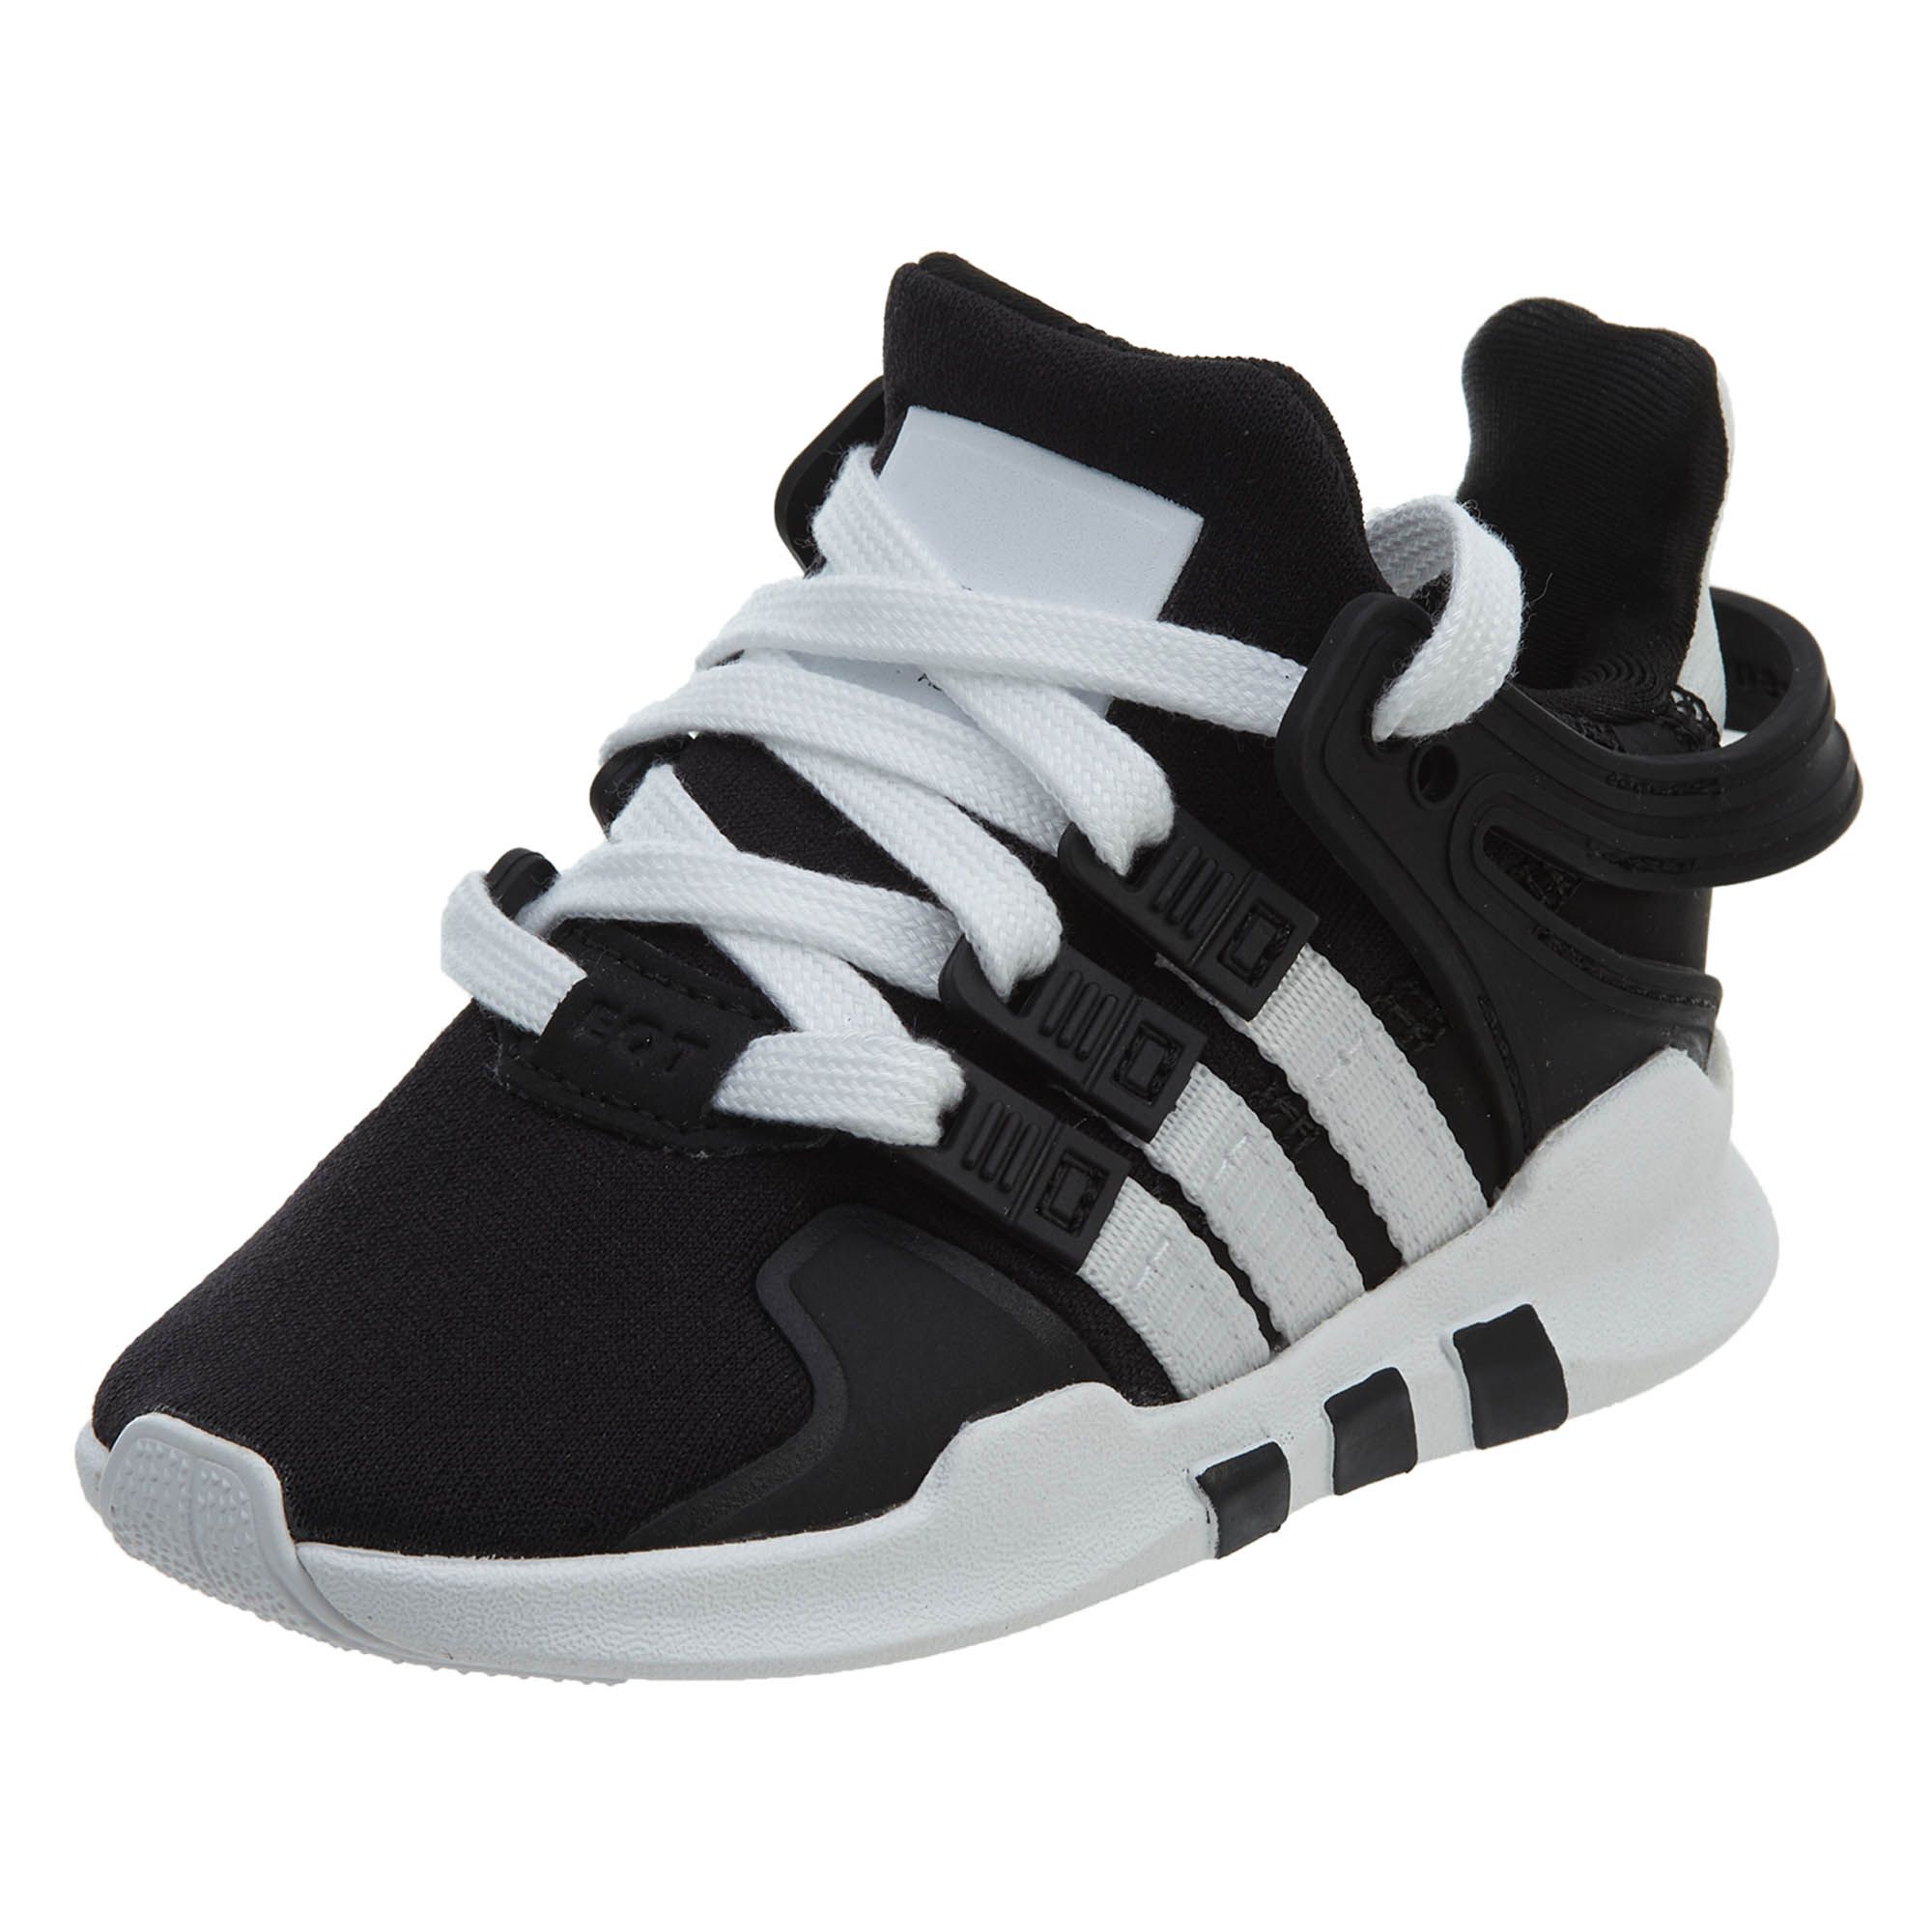 adidas eqt support adv toddler